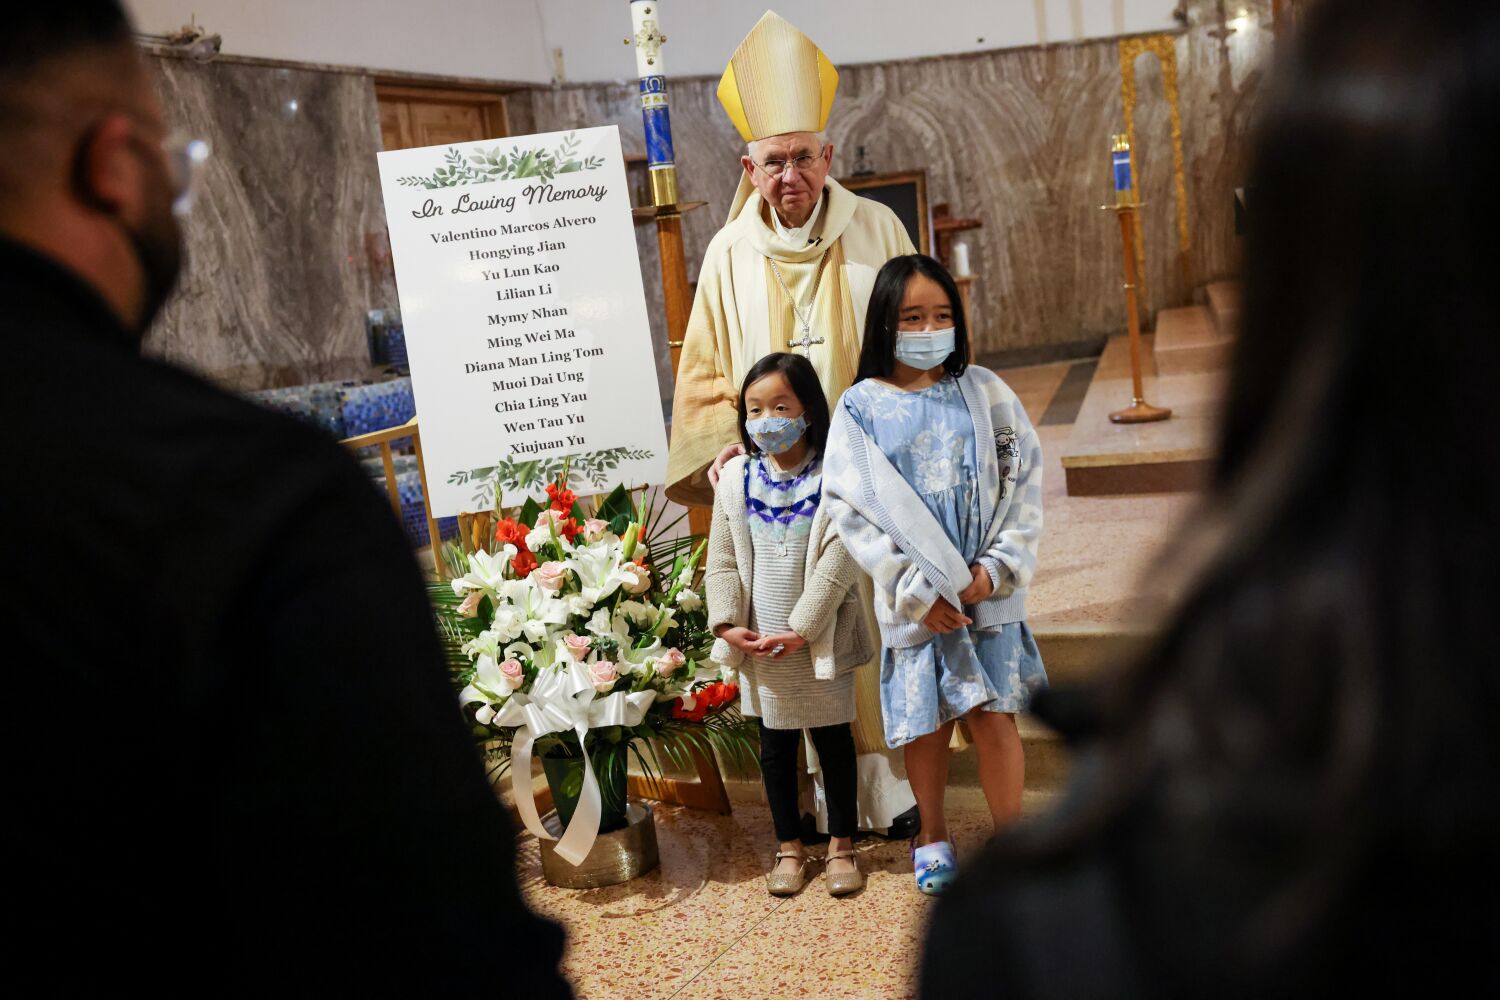 Archbishop presides over special Mass to honor Monterey Park shooting victims